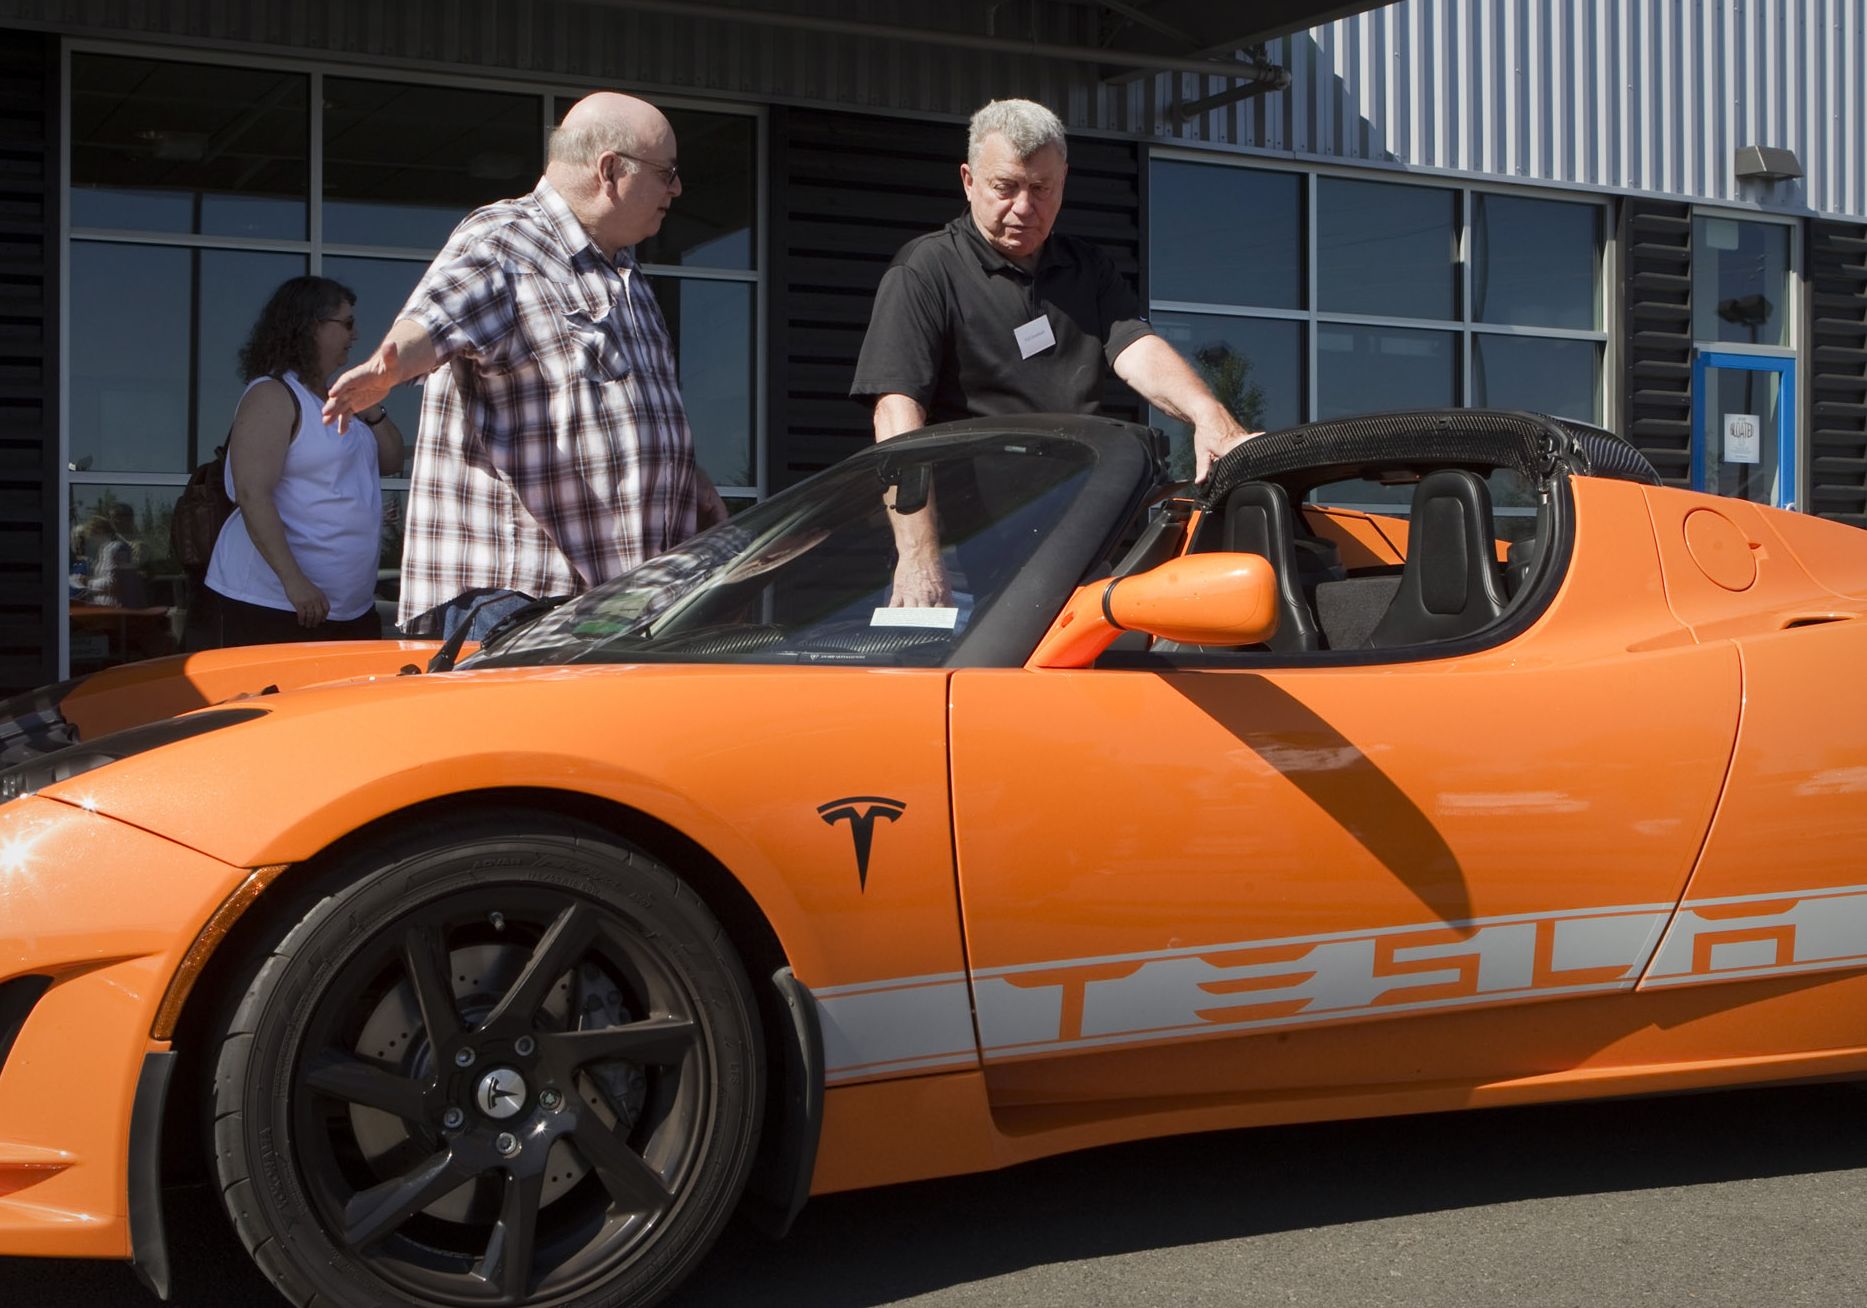 More race car than go-kart, this electric Tesla goes from 0-60 mph in 3.7 seconds.